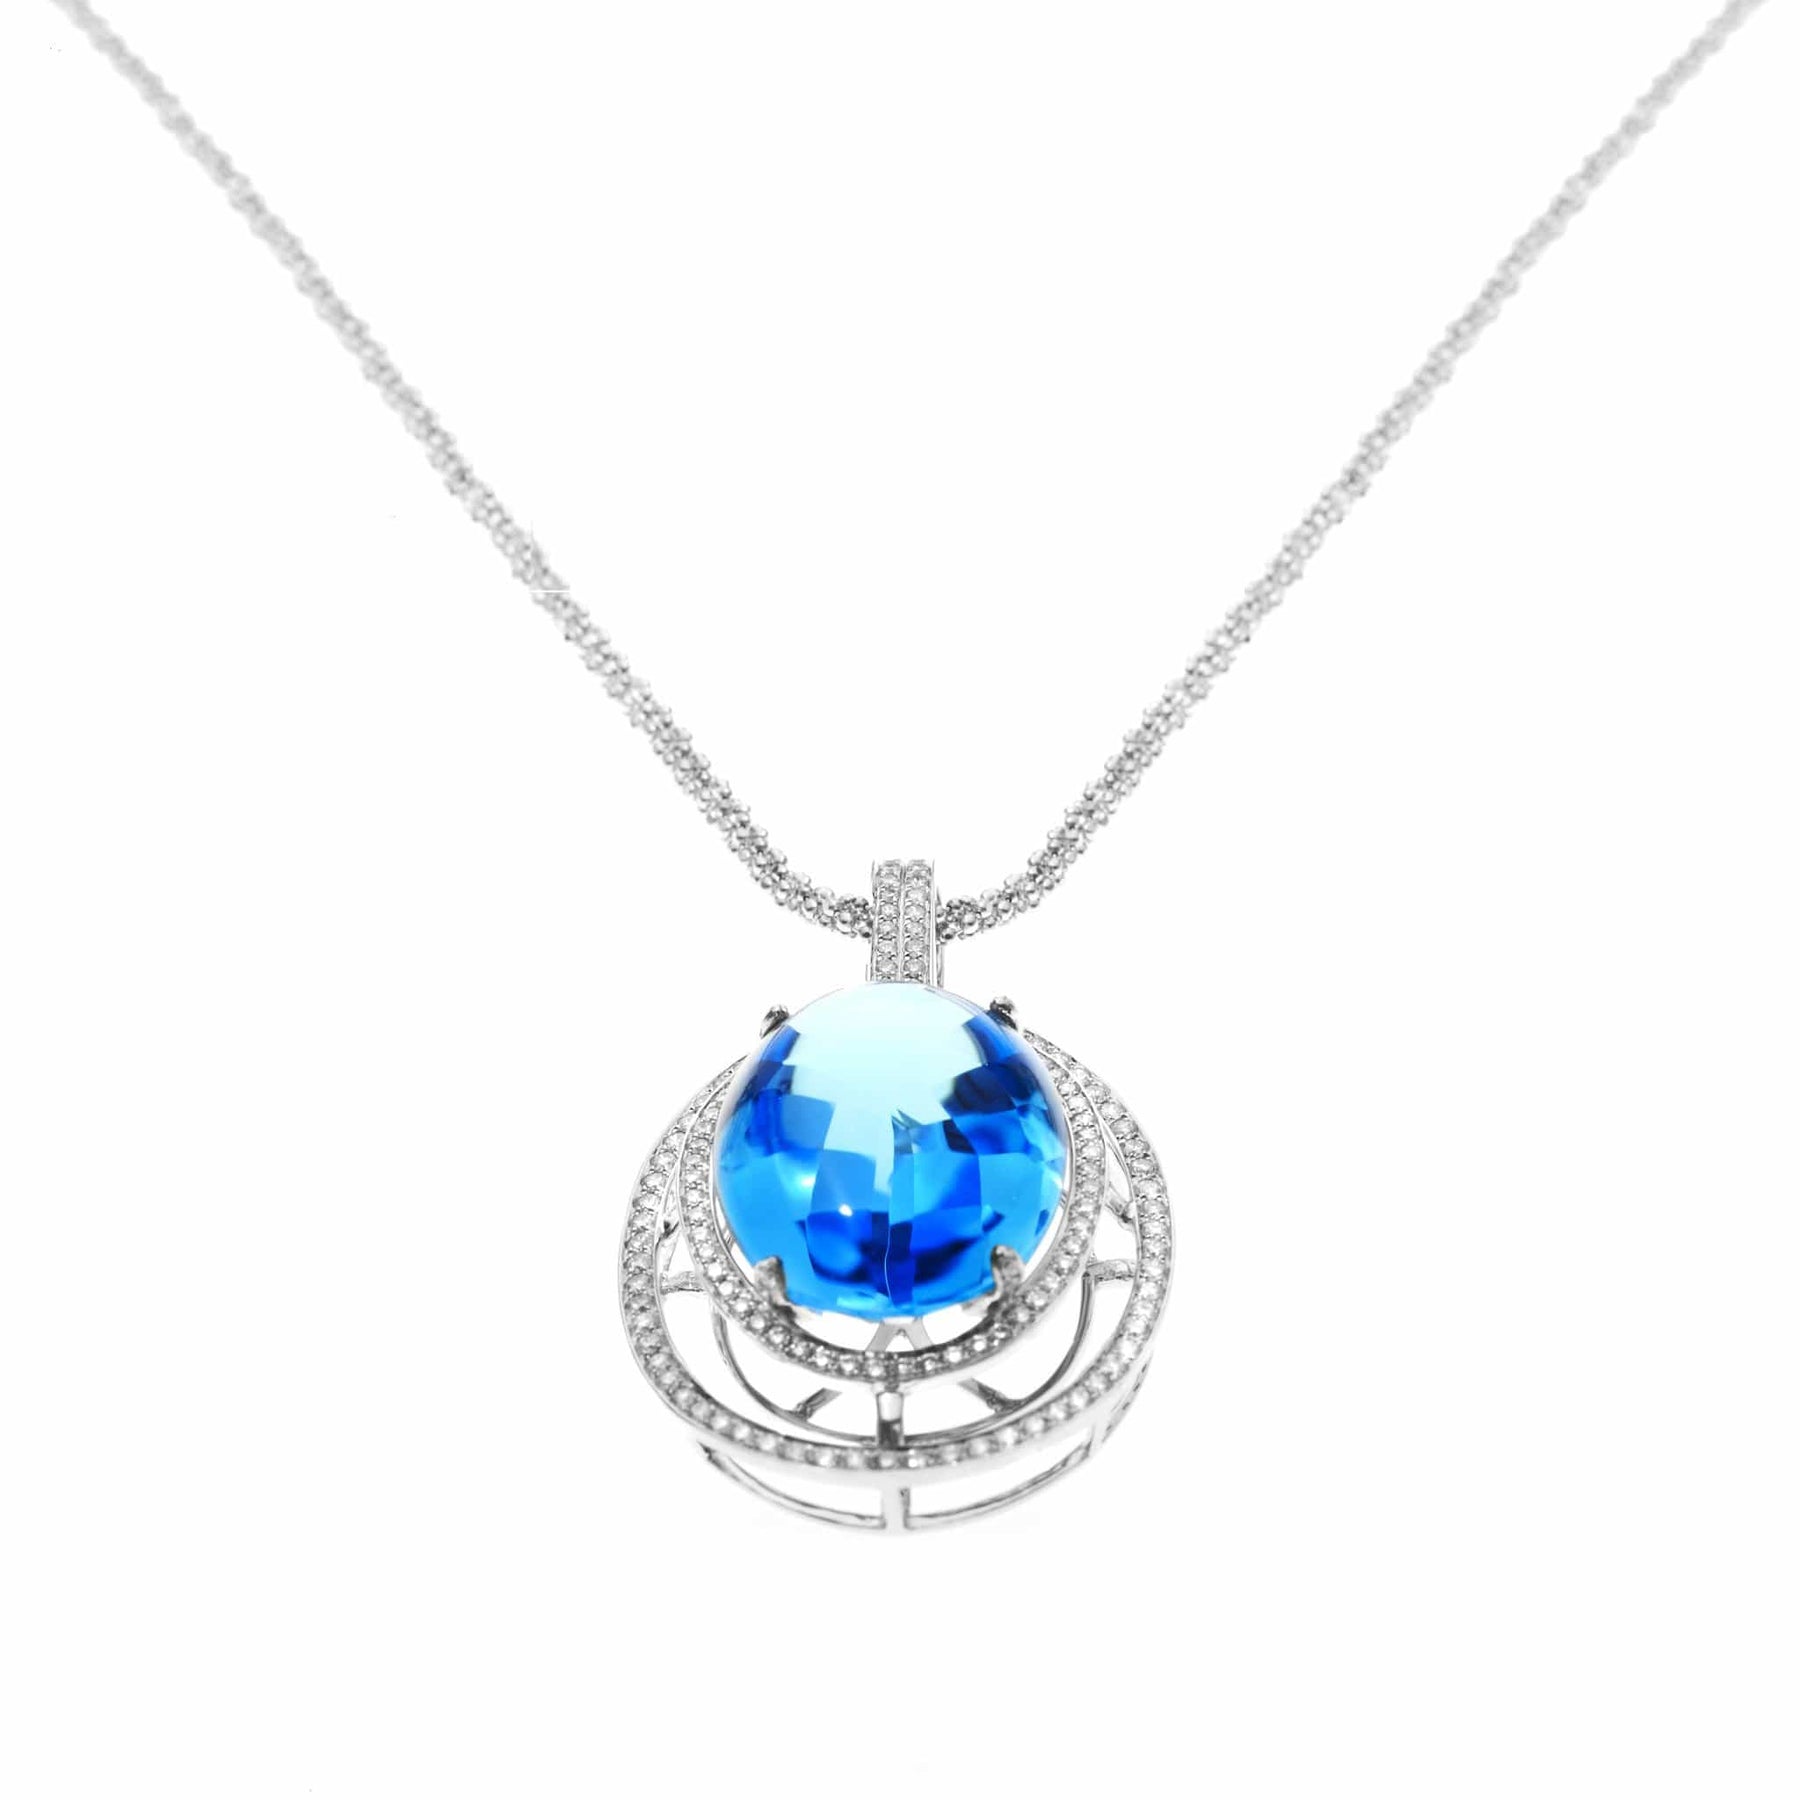 BLUE TOPAZ NECKLACE - SCINTILLATING LAGOON - Chris Aire Fine Jewelry & Timepieces